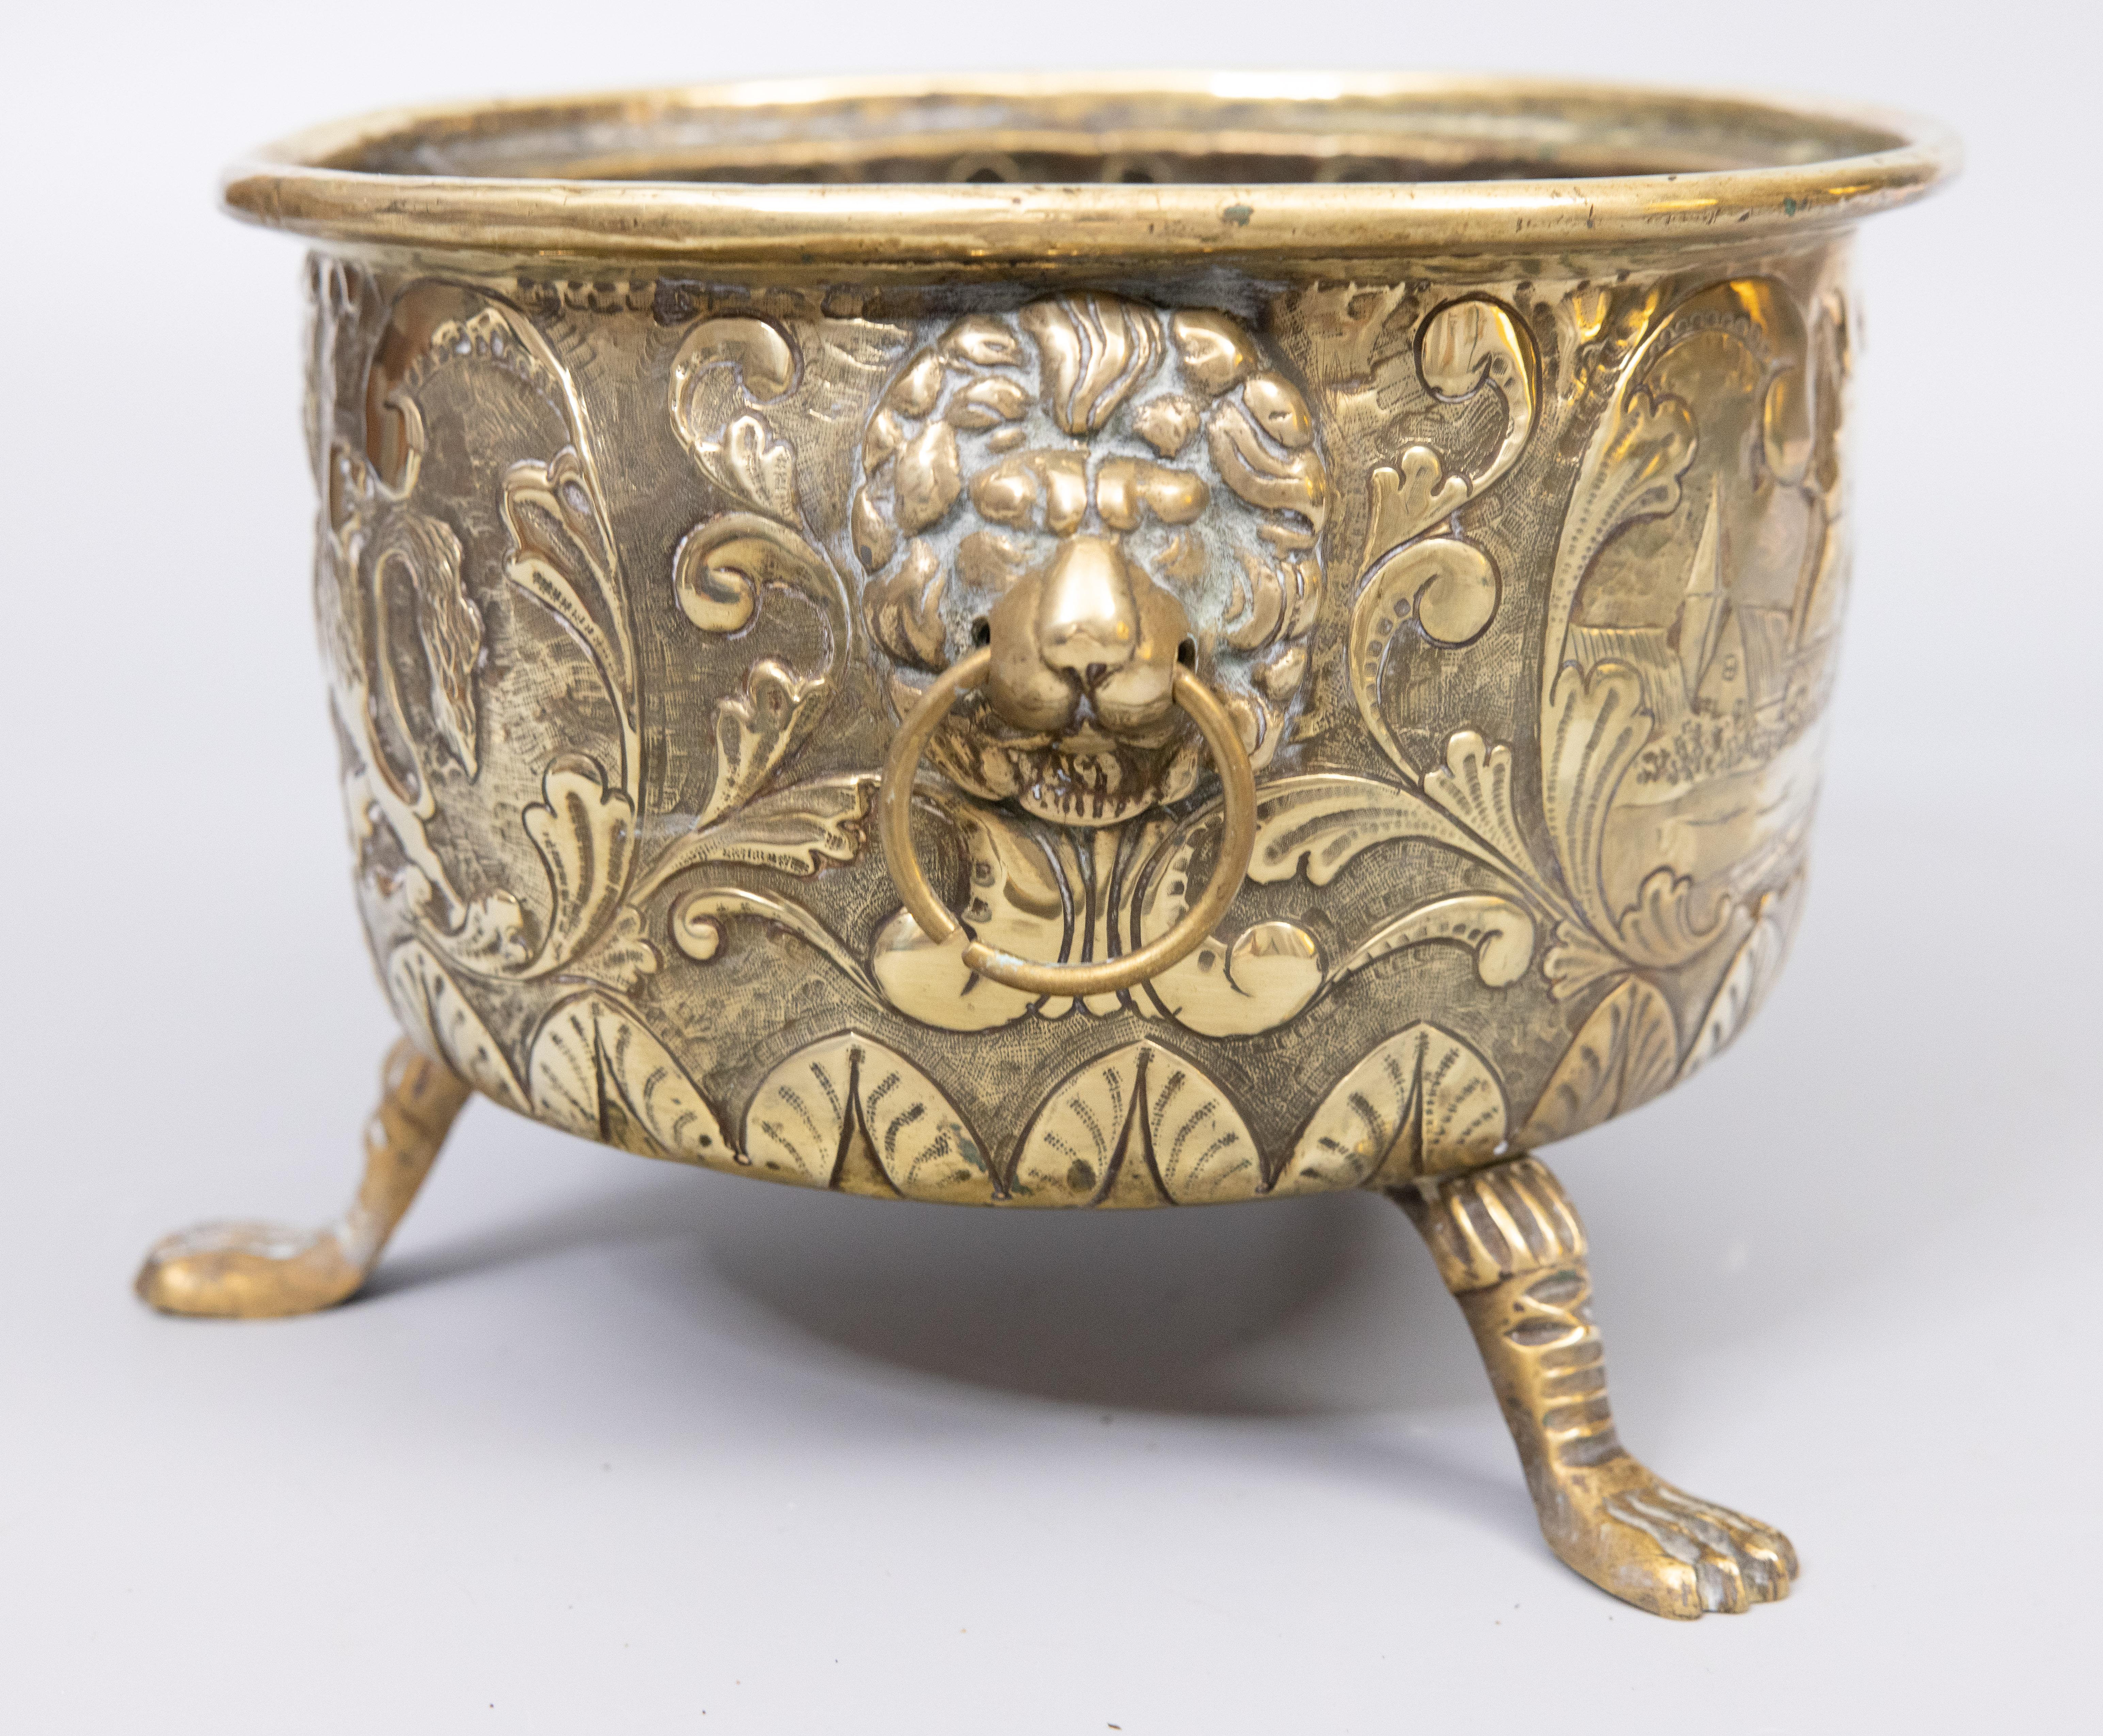 A superb antique 19th century French brass repoussé footed planter / jardiniere / cachepot, circa 1890. This fine hand crafted jardiniere is decorated with heraldic designs on one side and French country landscape scenes on the other side in a